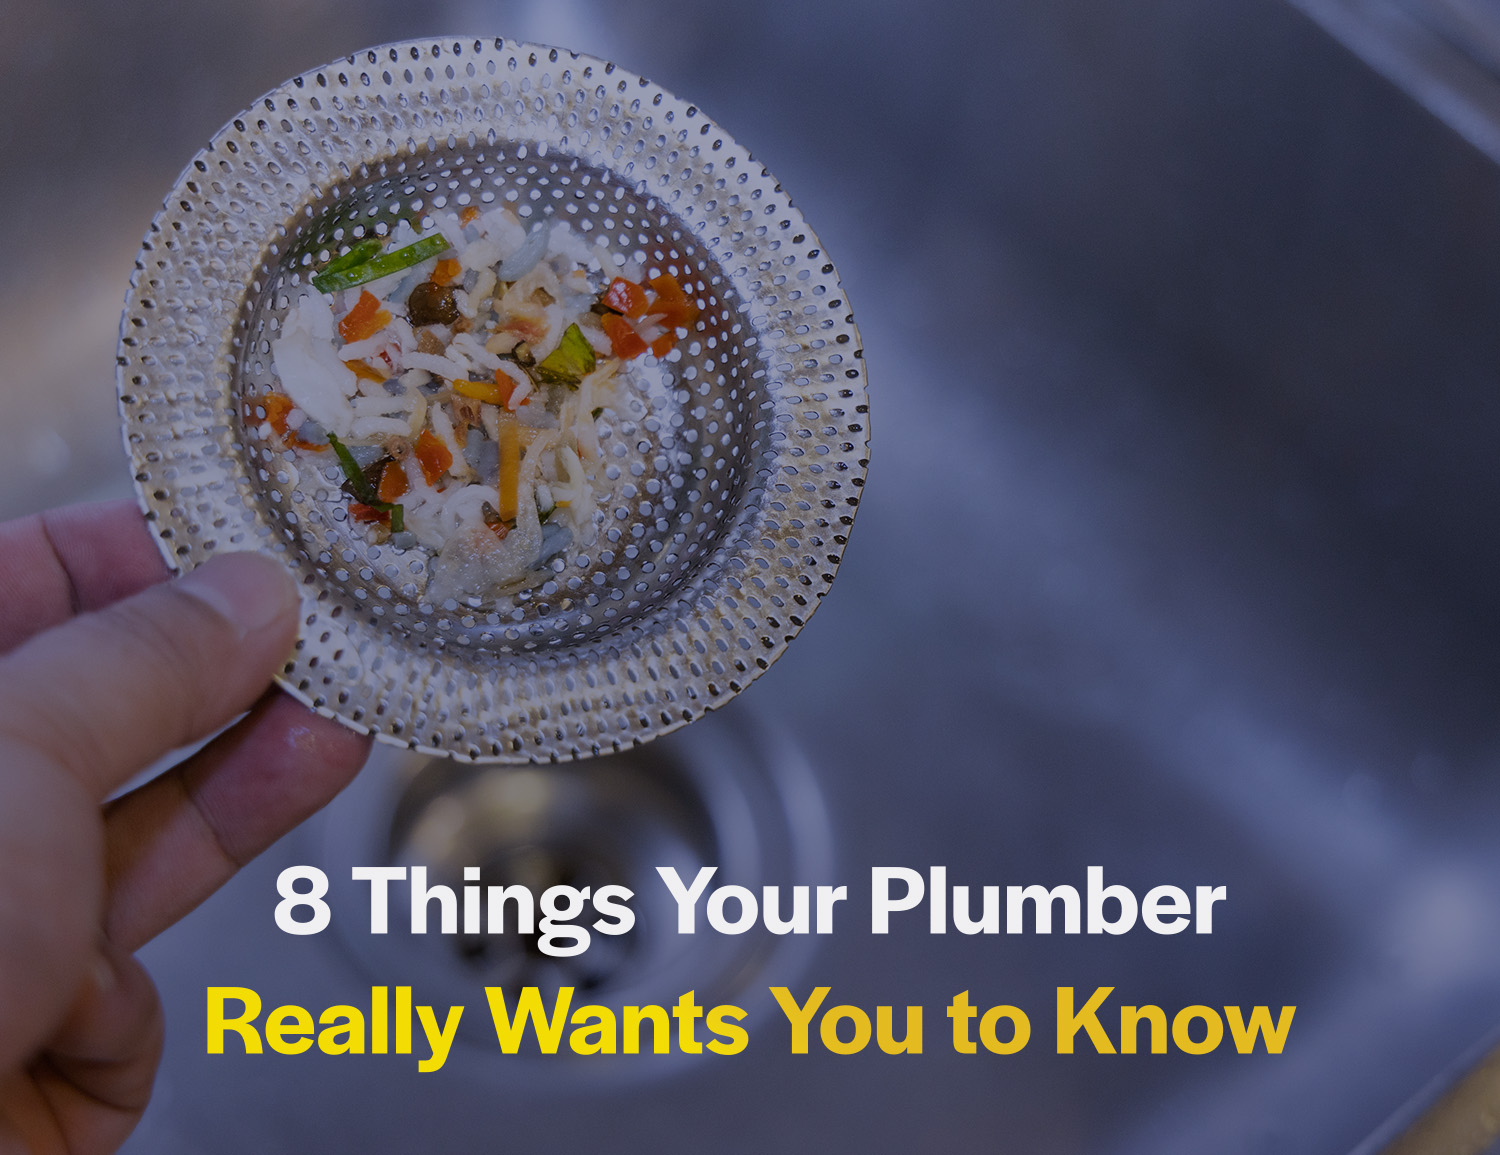 8 Things Your Plumber Really Wants You to Know